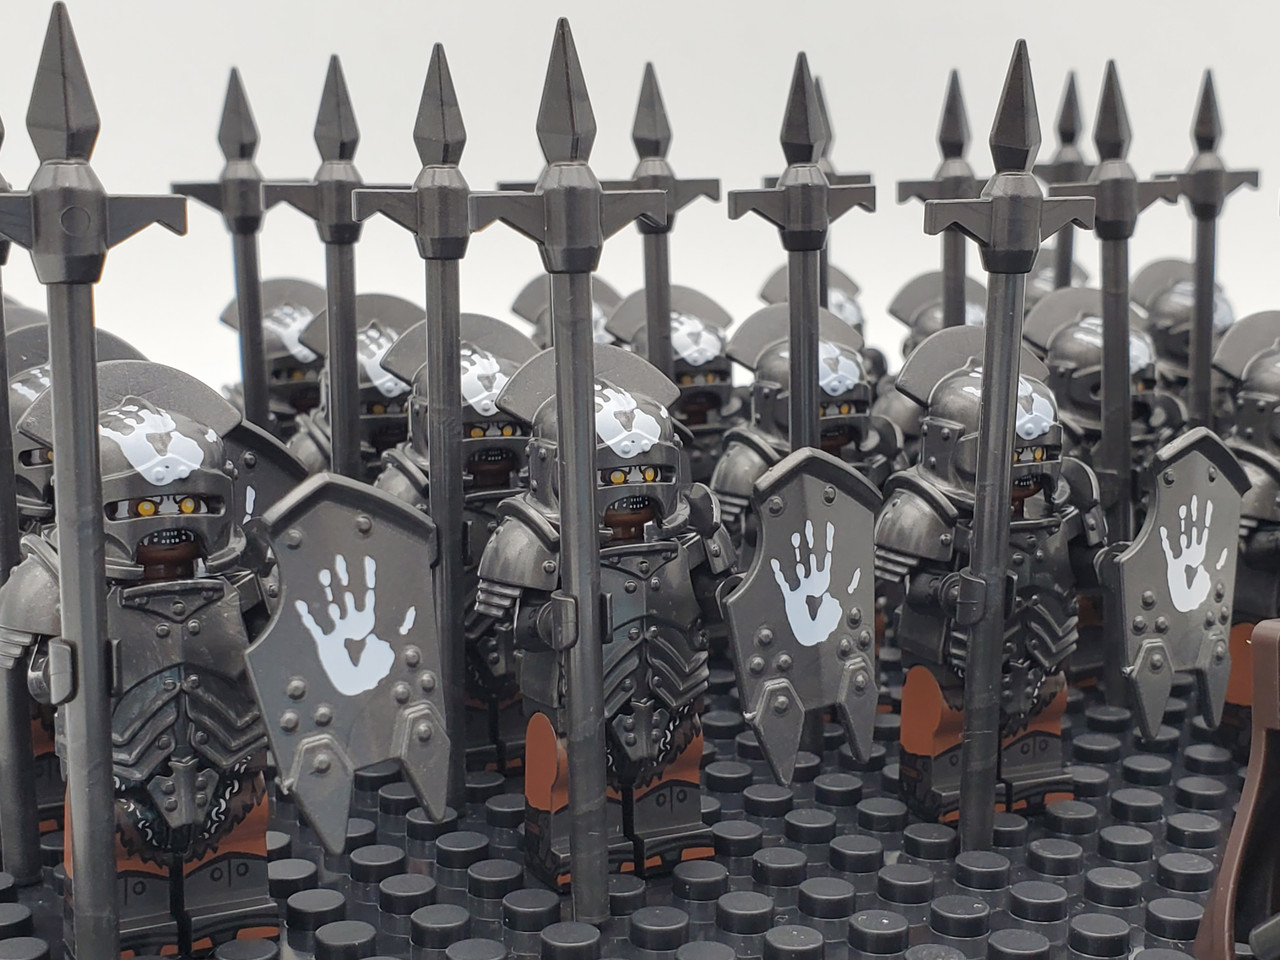 LOTR Orc Heavy Pikes Infantry Army 21 Minifigures Set - J's Little Things